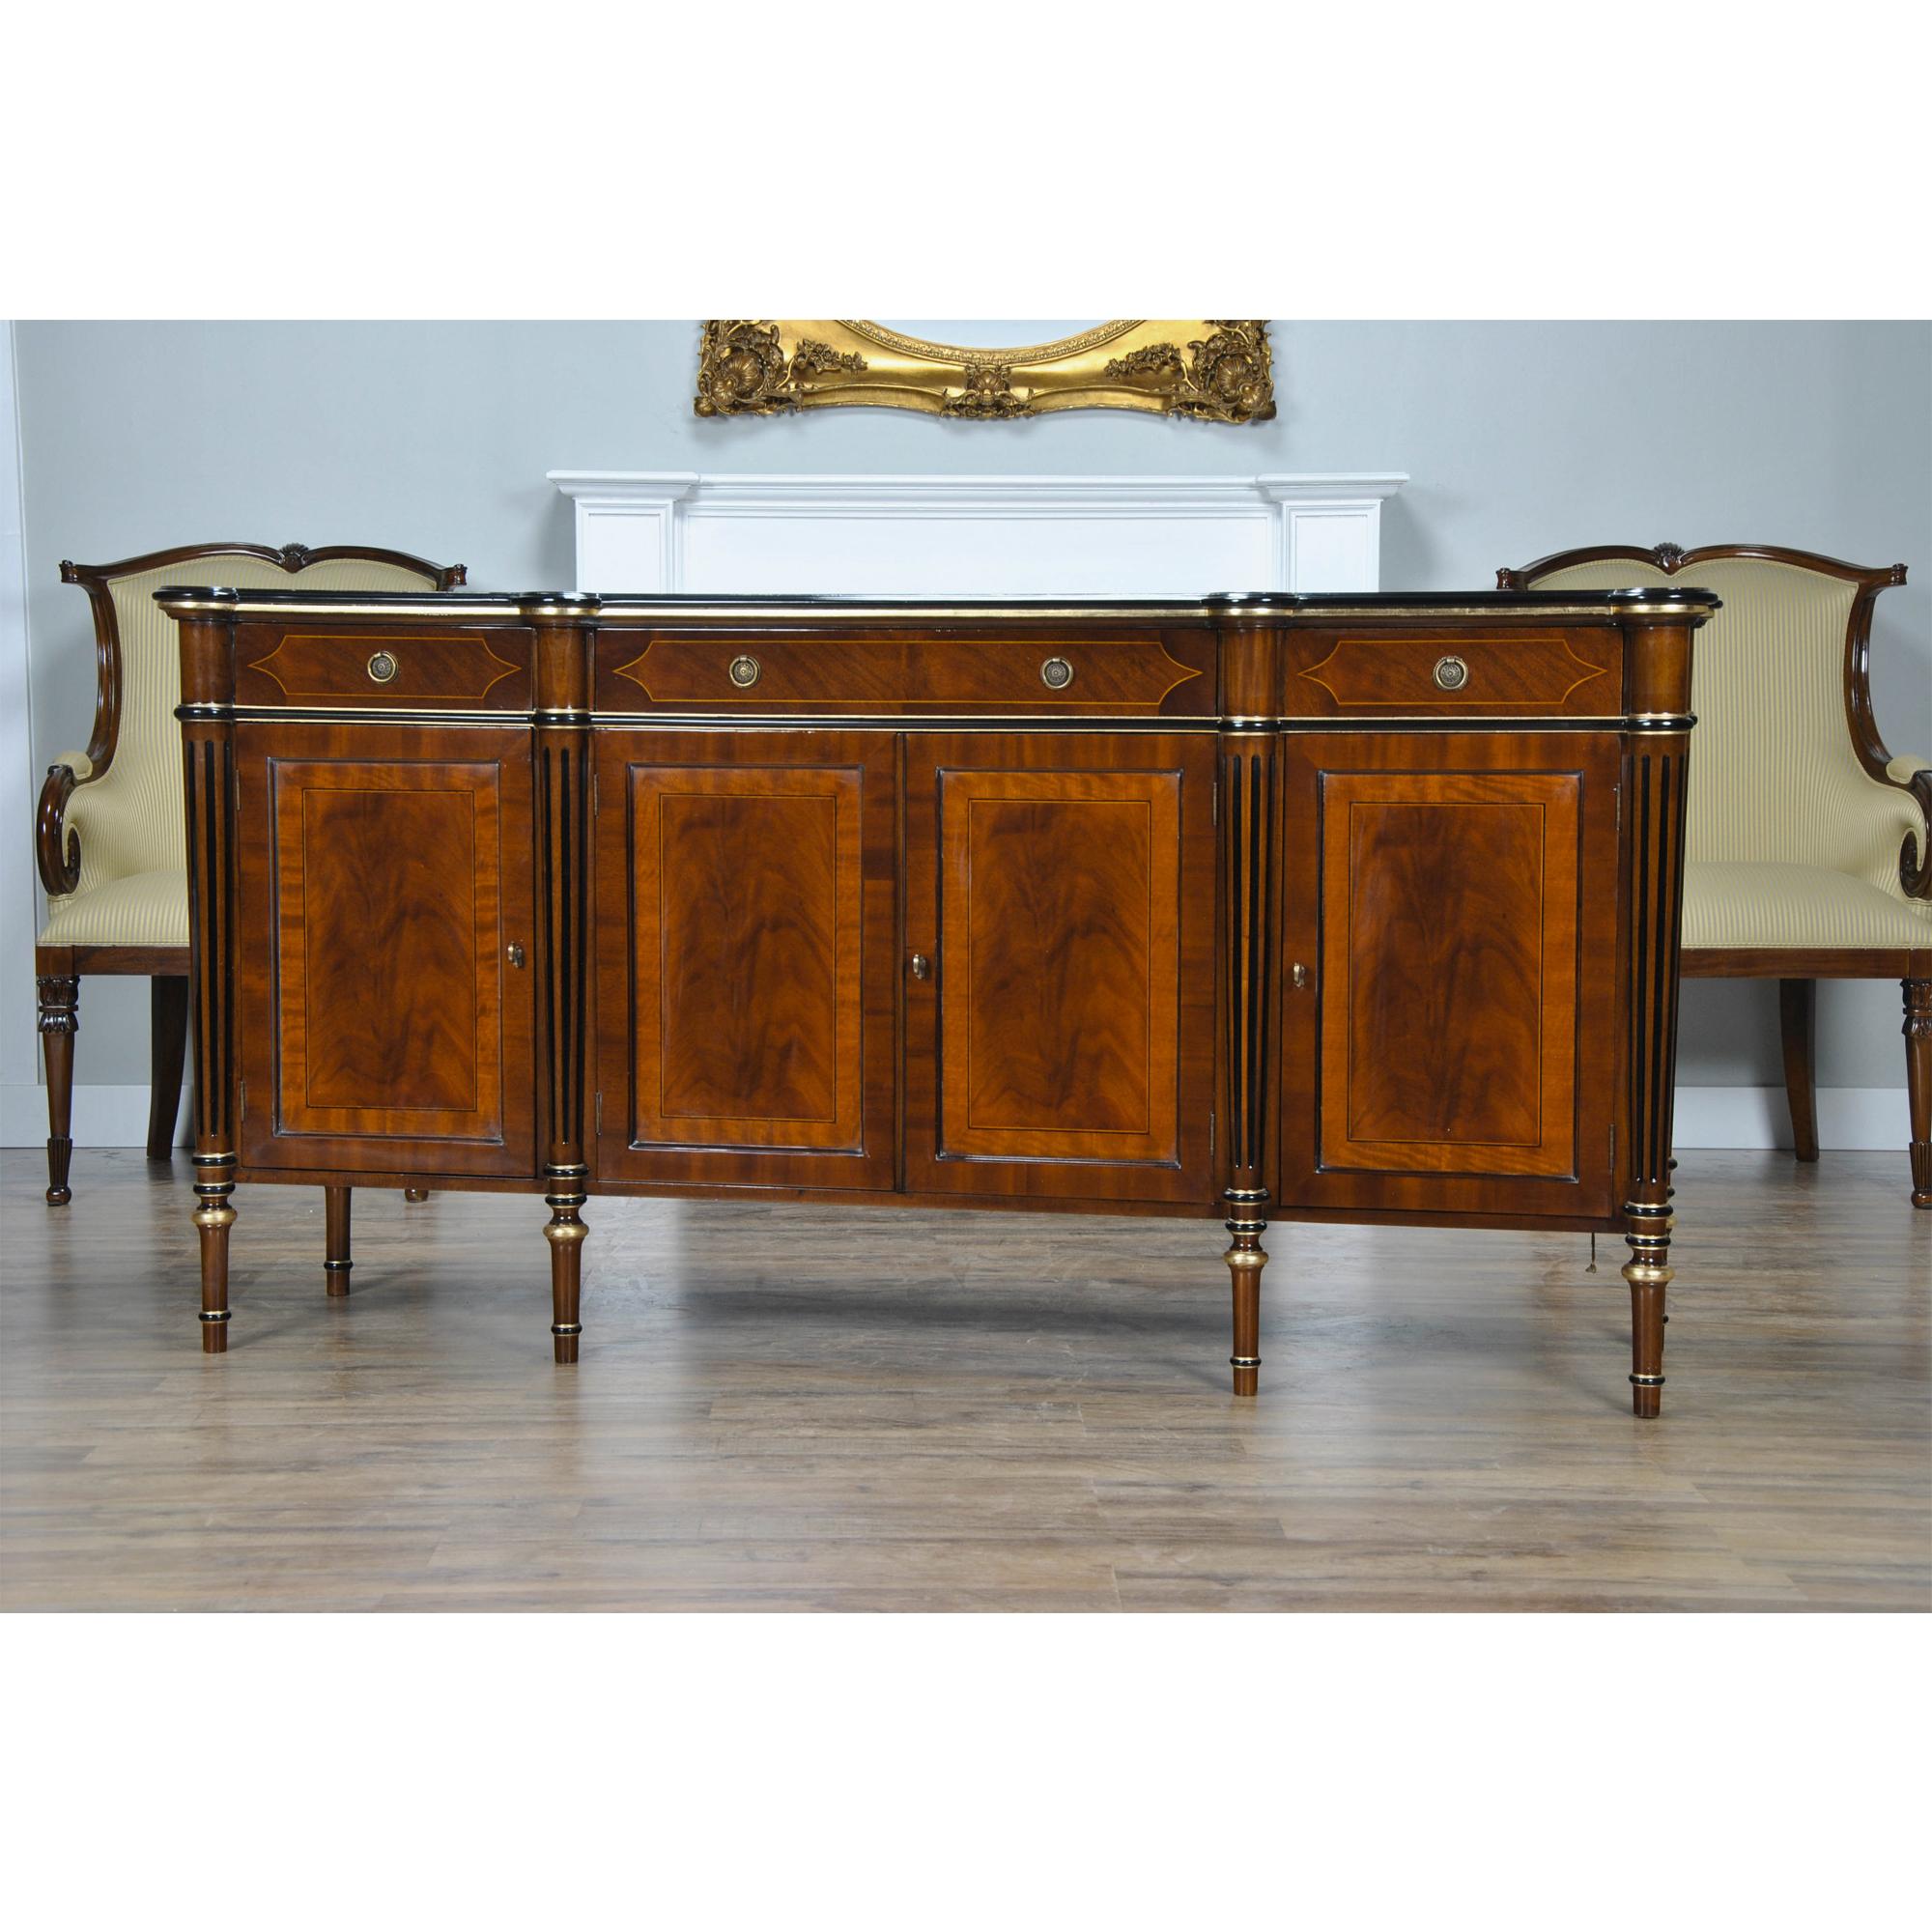 The Regency Sideboard draws it’s inspiration form the great homes in England during the reign of the Prince regent in the late eighteenth century. Our Regency Sideboard has it all with sophisticated design and practical storage. The fluted columns